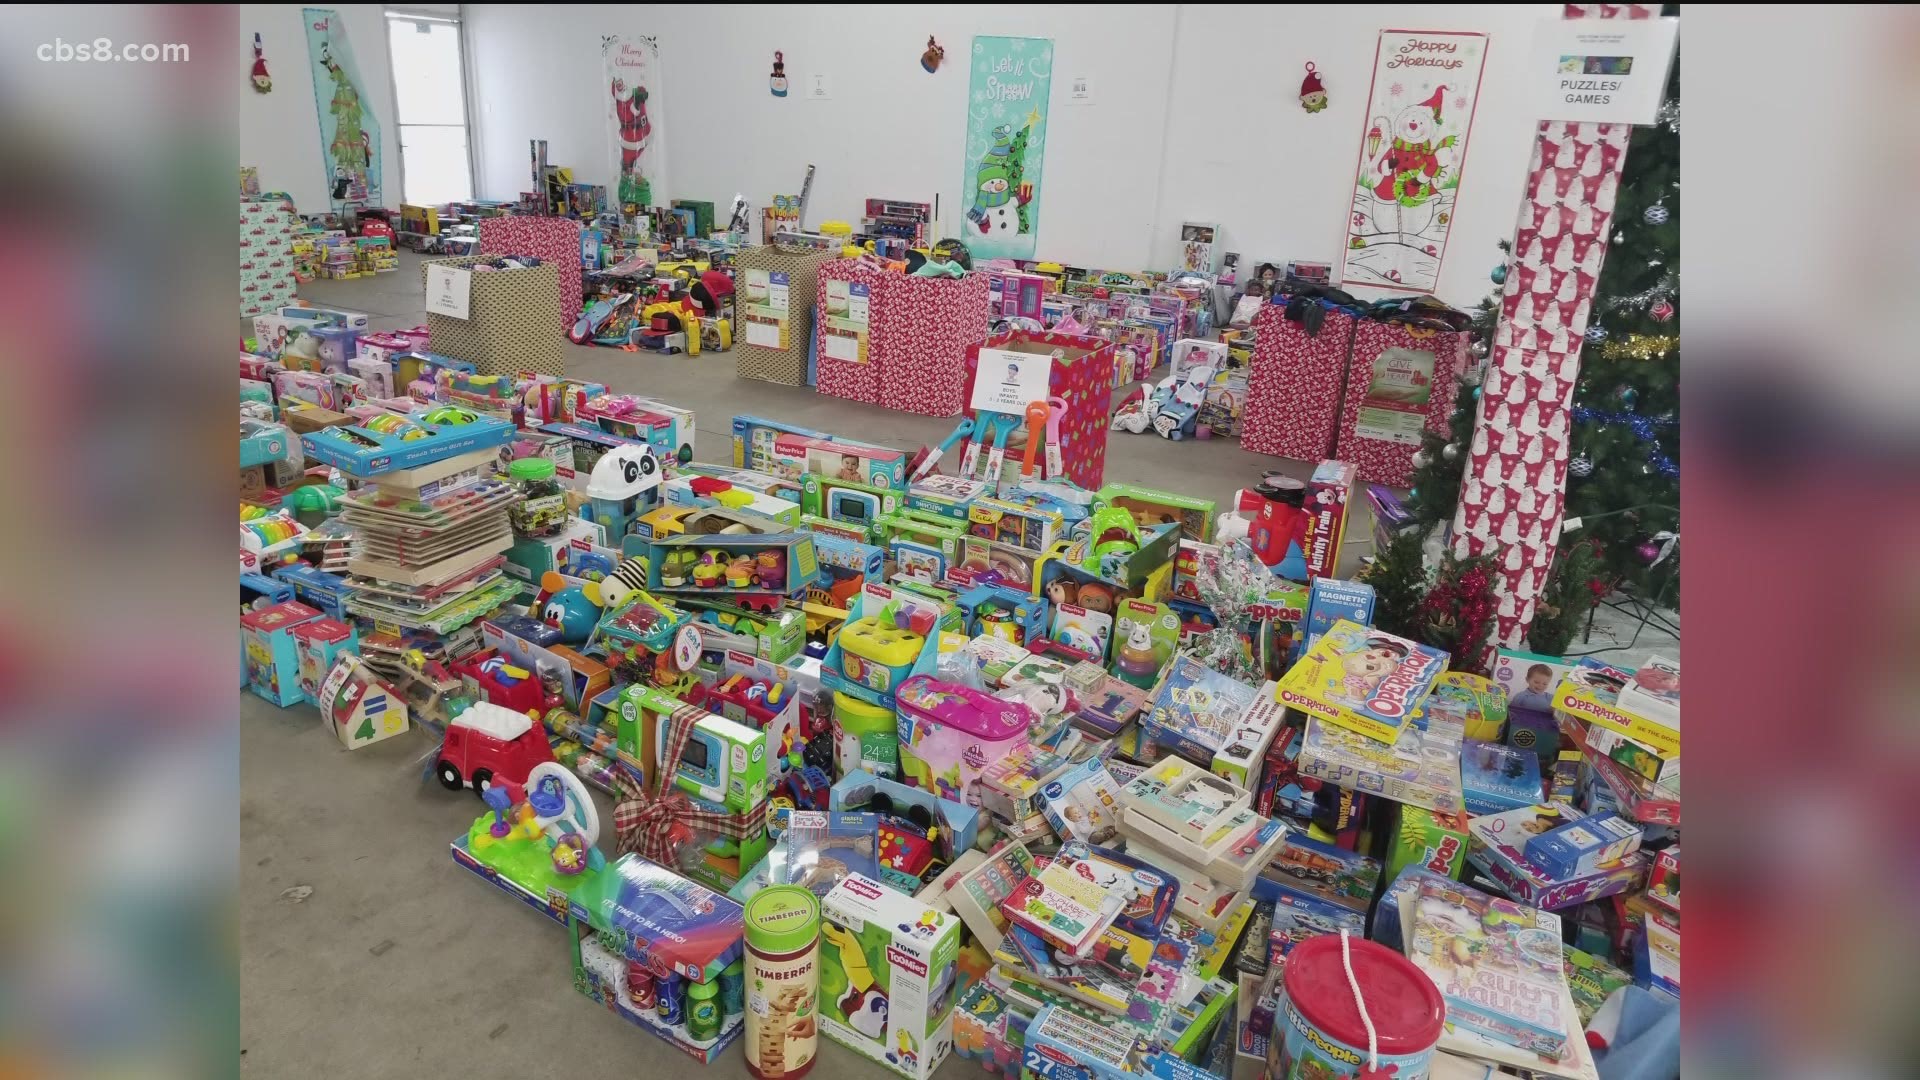 News 8 is proud to team up with Promises 2 Kids for their annual toy drive. Tonya Torosian & Nephtali Ramos talked about how the drive helps San Diego foster kids.